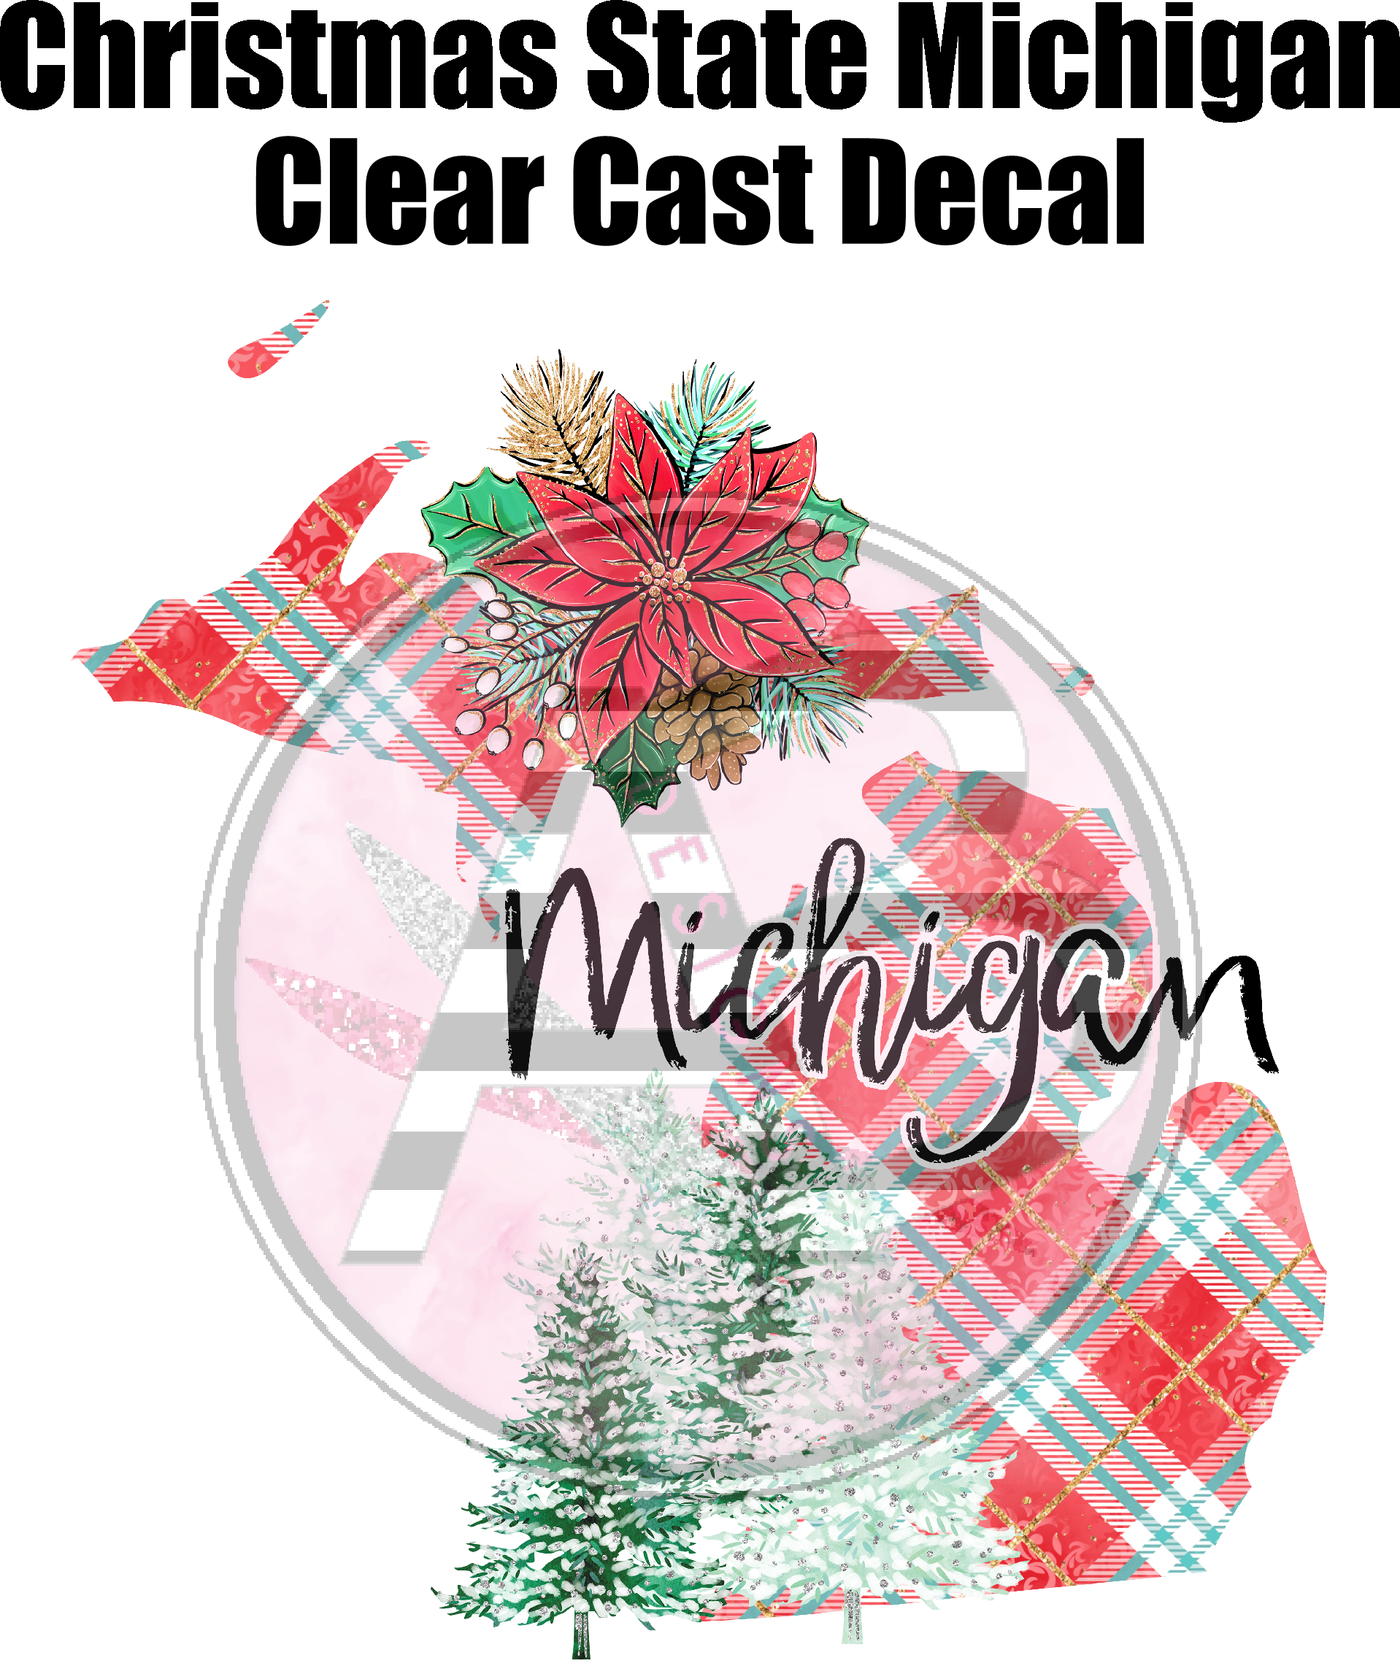 Christmas State Michigan - Clear Cast Decal